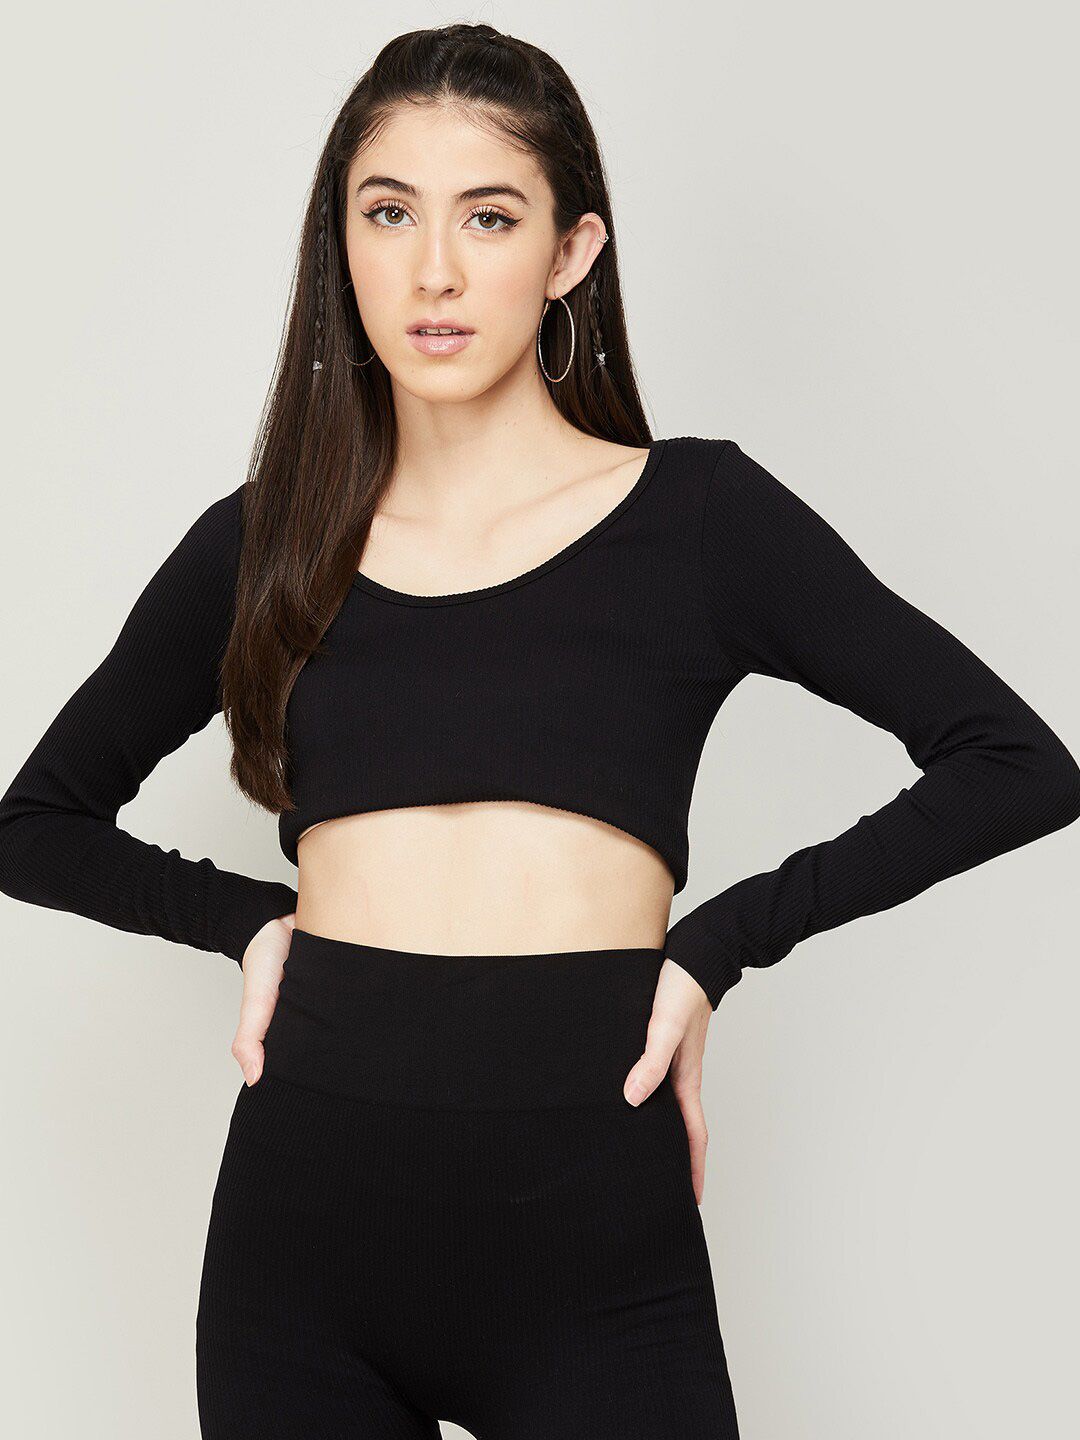 Ginger by Lifestyle Black Fitted Crop Top Price in India